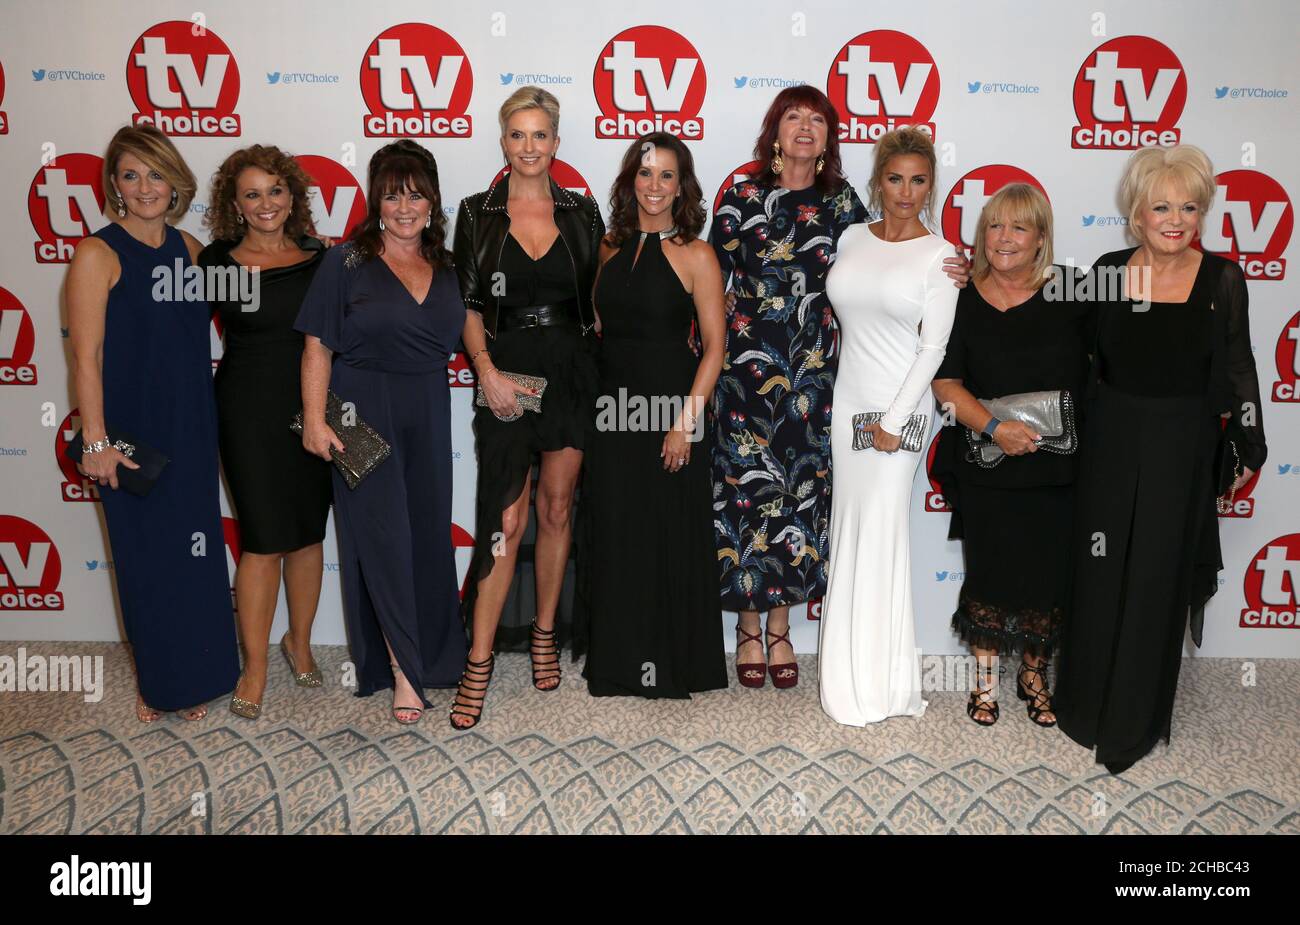 (left to right) Kaye Adams, Julia Sawalha, Coleen Nolan, Penny Lancaster, Andrea McLean, Janet Steet Porter, Katie Price, Linda Robson and Sherrie Hewson arriving for the TV Choice Awards 2016 held at The Dorchester Hotel, Park Lane, London. PRESS ASSOCIATION Photo. Picture date: Monday September 5, 2016. See PA story SHOWBIZ TVChoice. Photo credit should read: Daniel Leal-Olivas/PA Wire Stock Photo